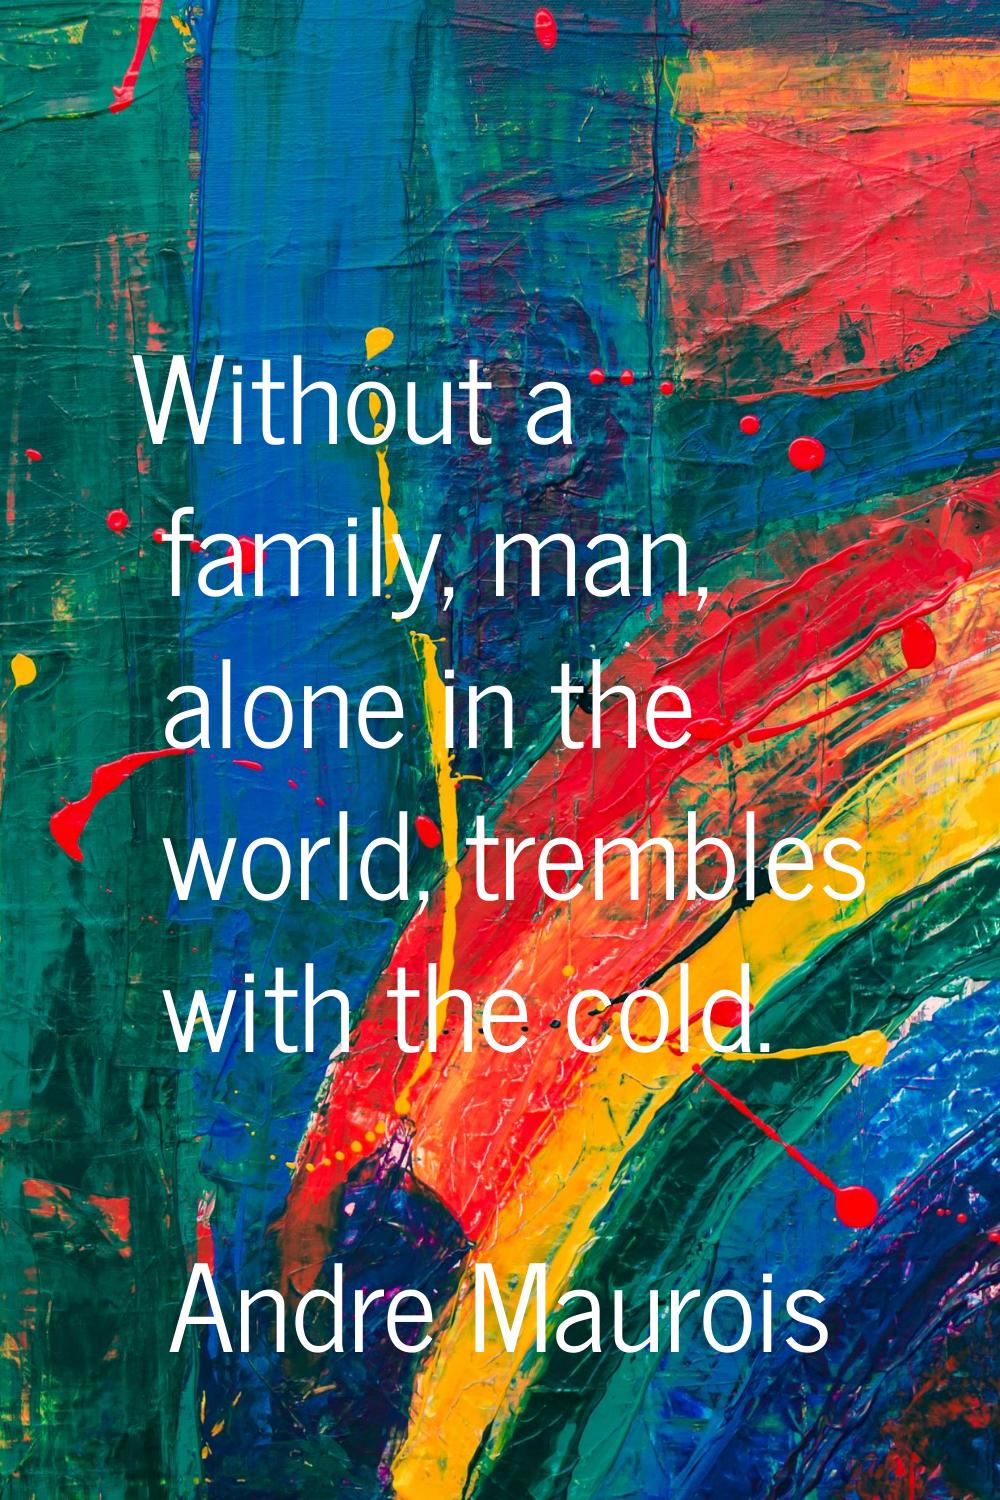 Without a family, man, alone in the world, trembles with the cold.